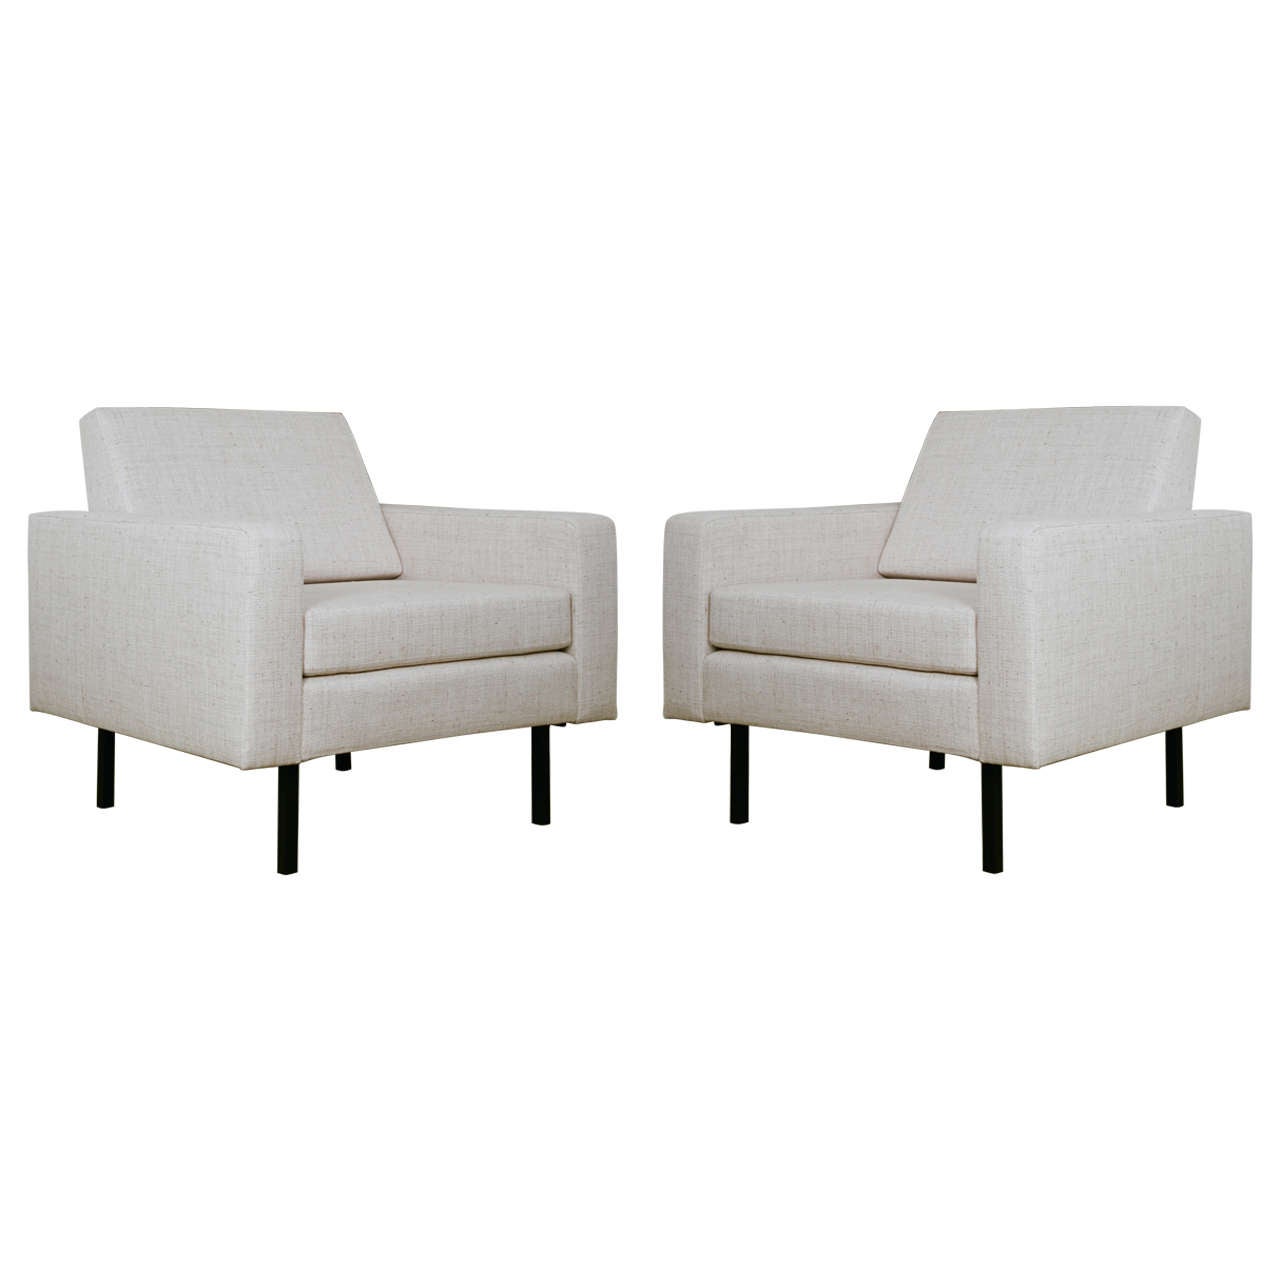 Pair of armchairs 910 by Joseph-André Motte - Steiner edition - 1960 For Sale